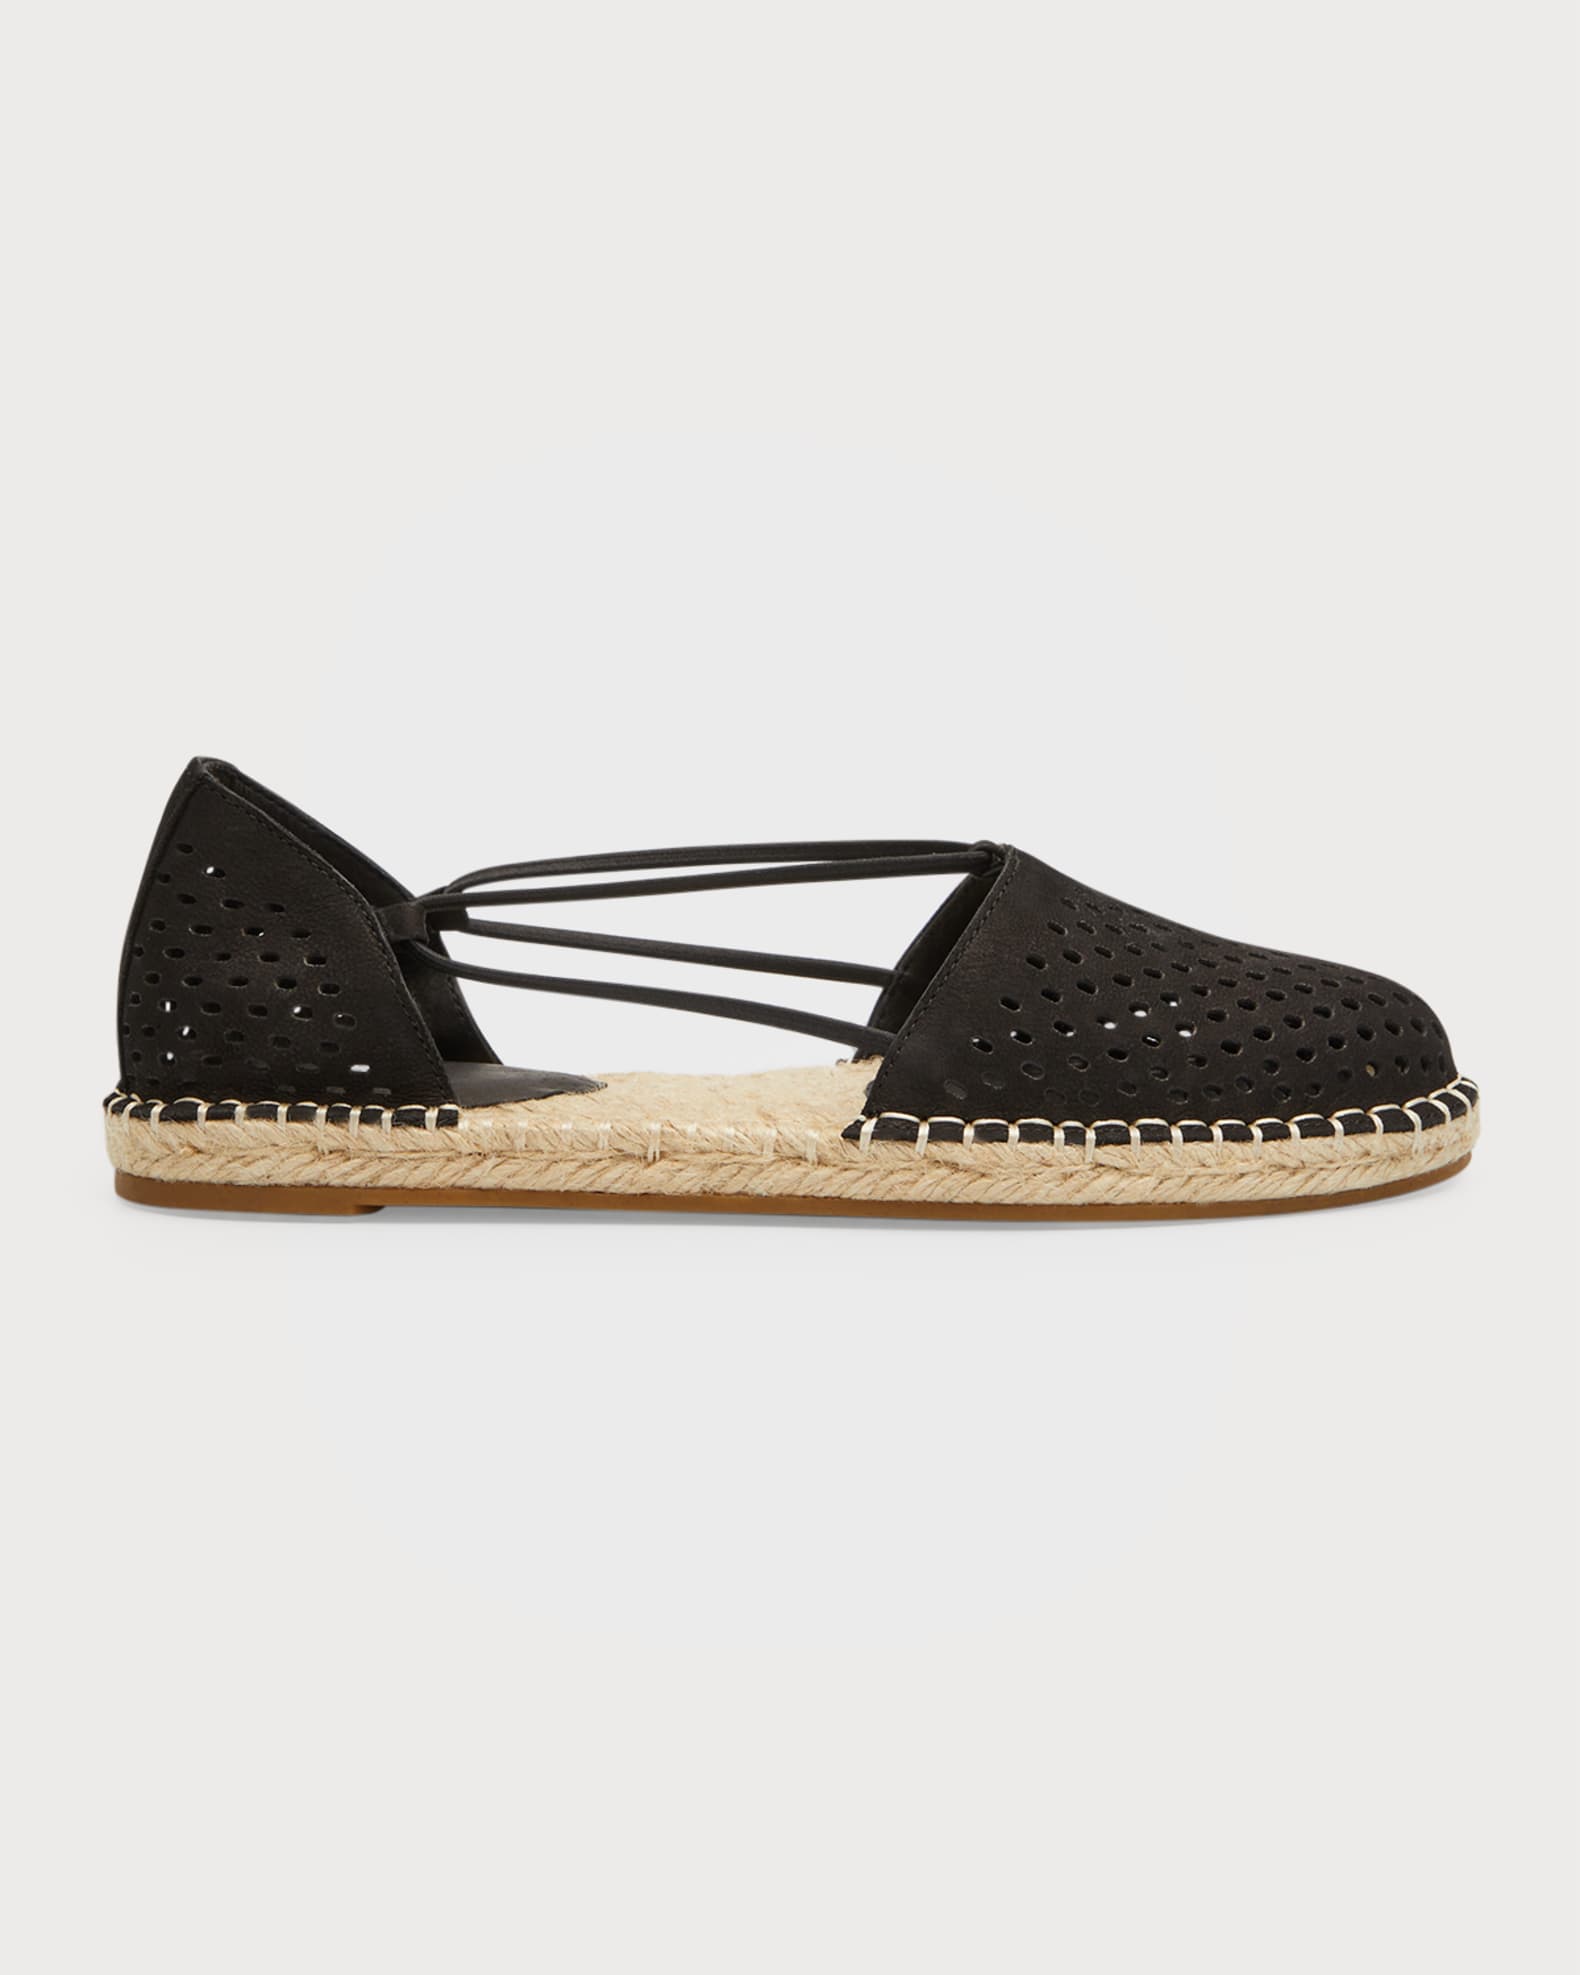 Eileen Fisher Lee Perforated Suede Flat Espadrilles | Neiman Marcus